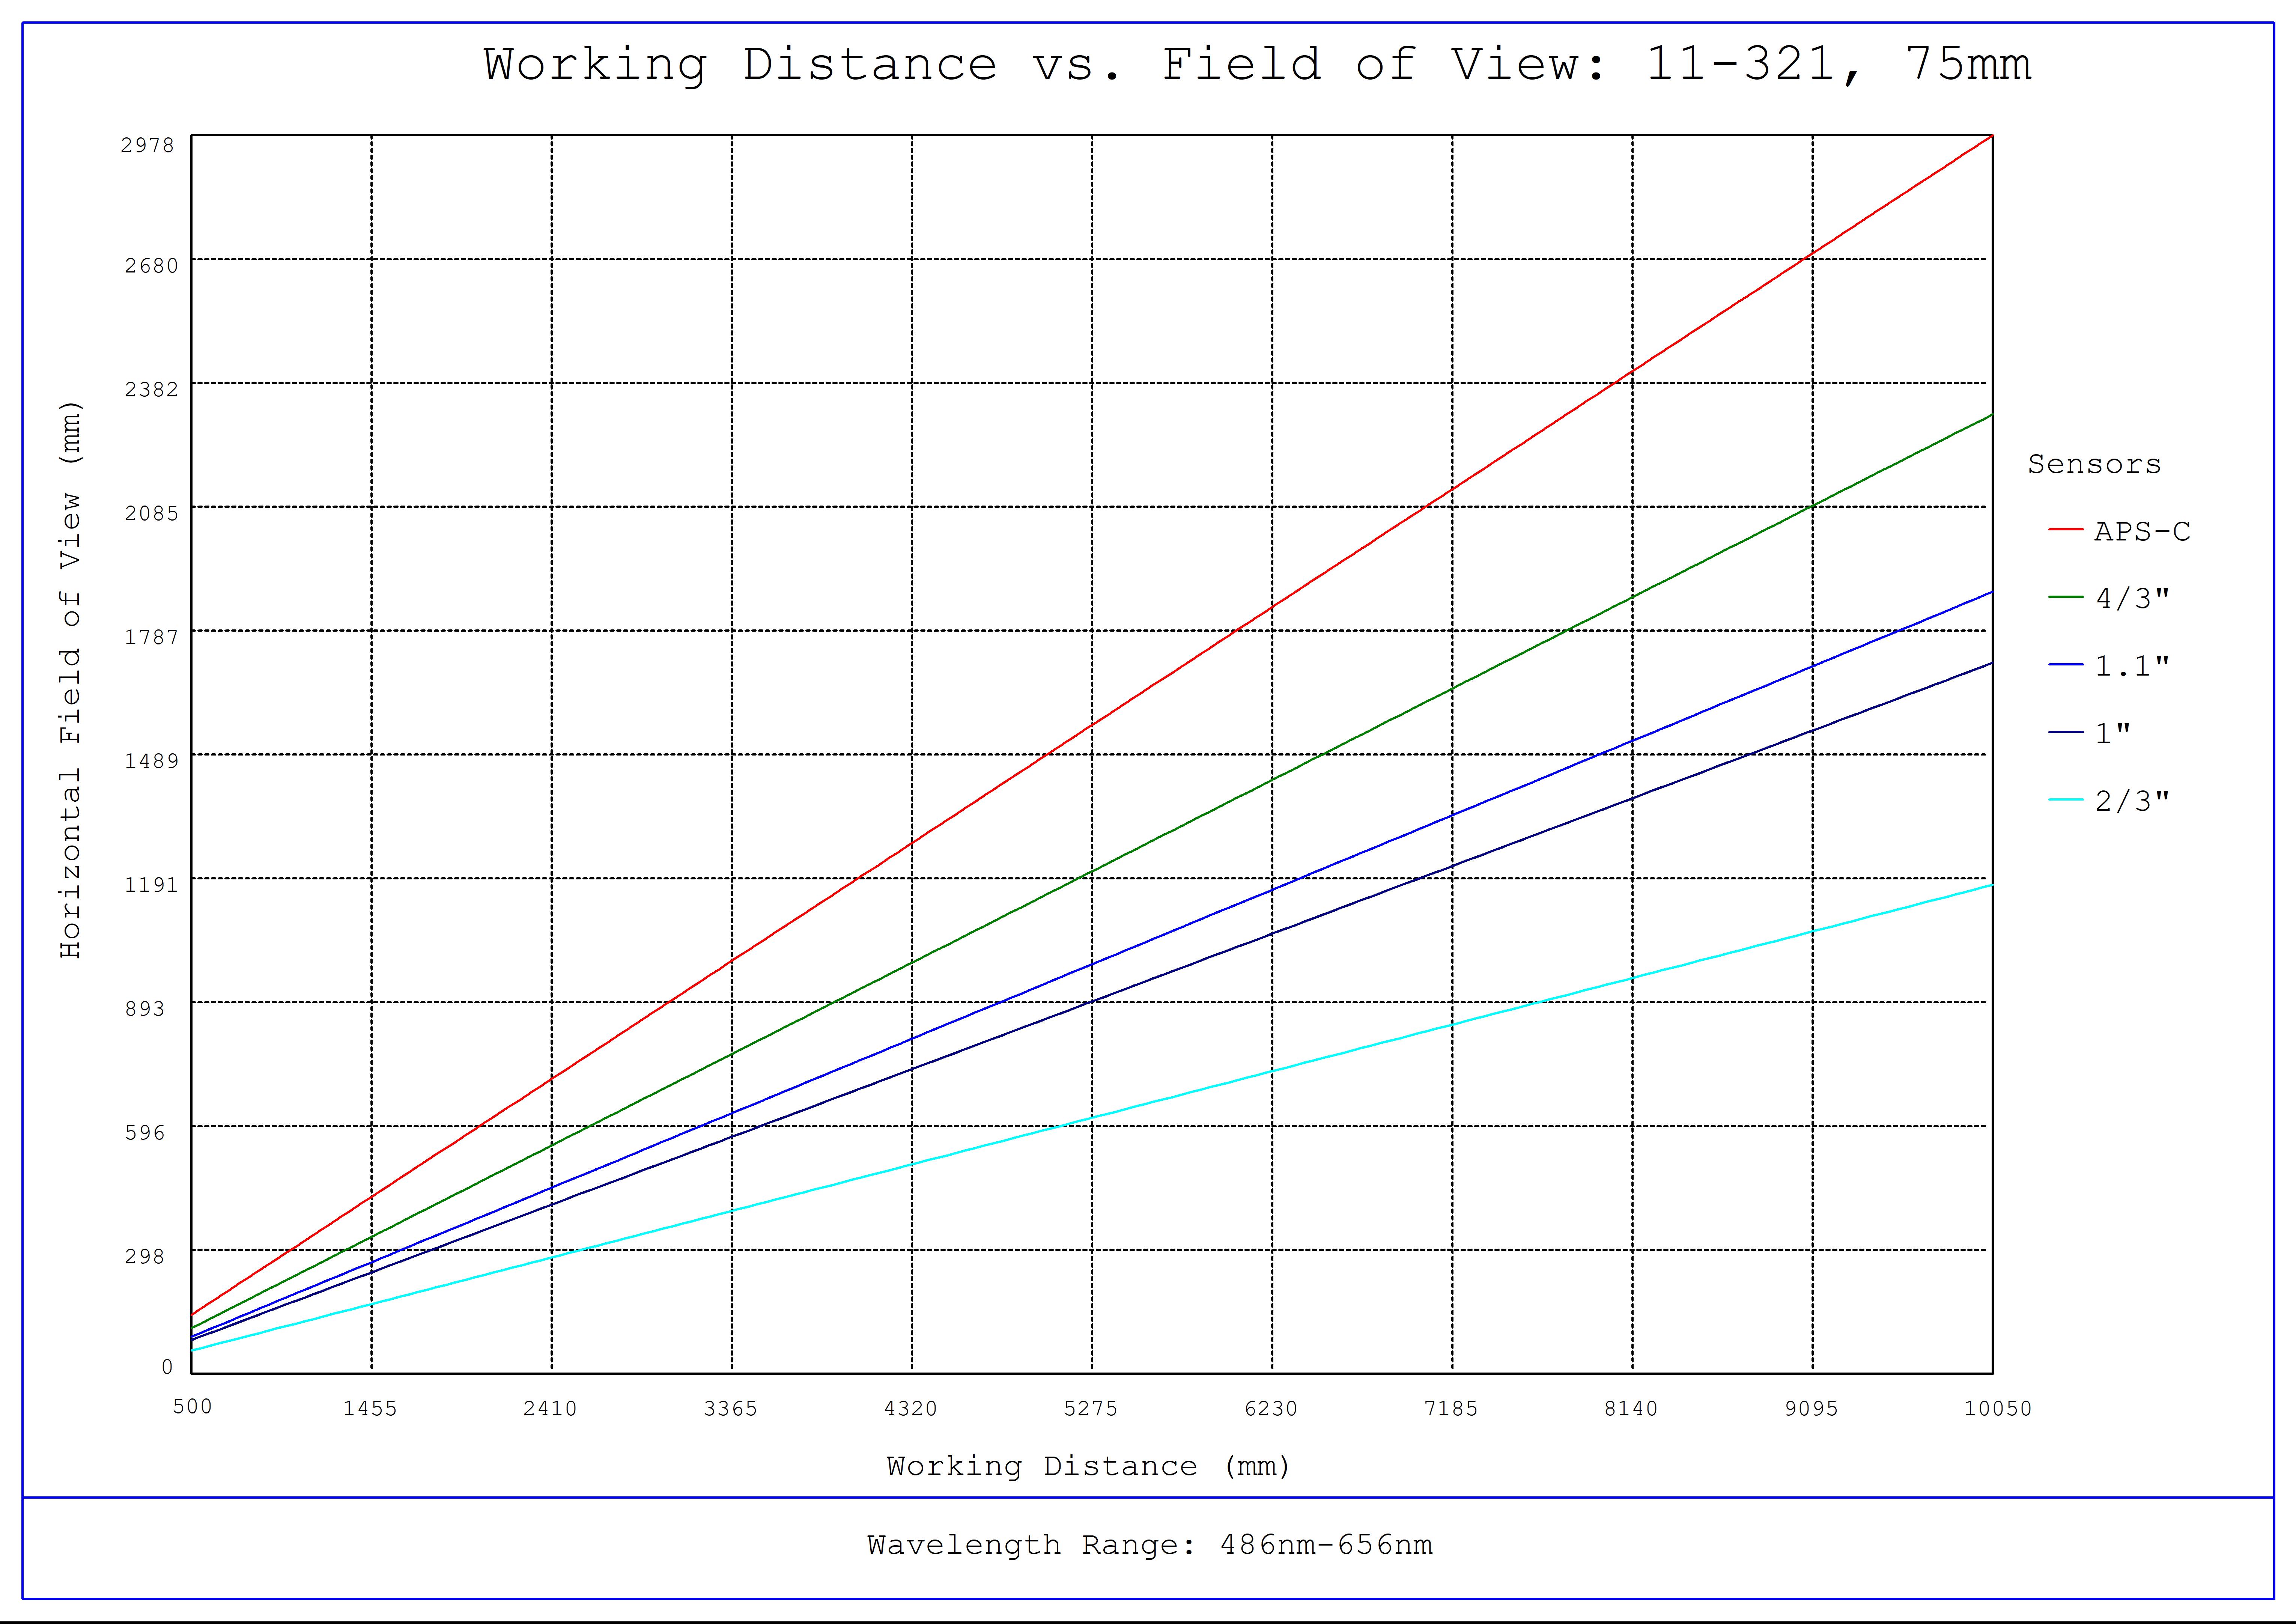 #11-321, 75mm CA Series Fixed Focal Length Lens, Working Distance versus Field of View Plot